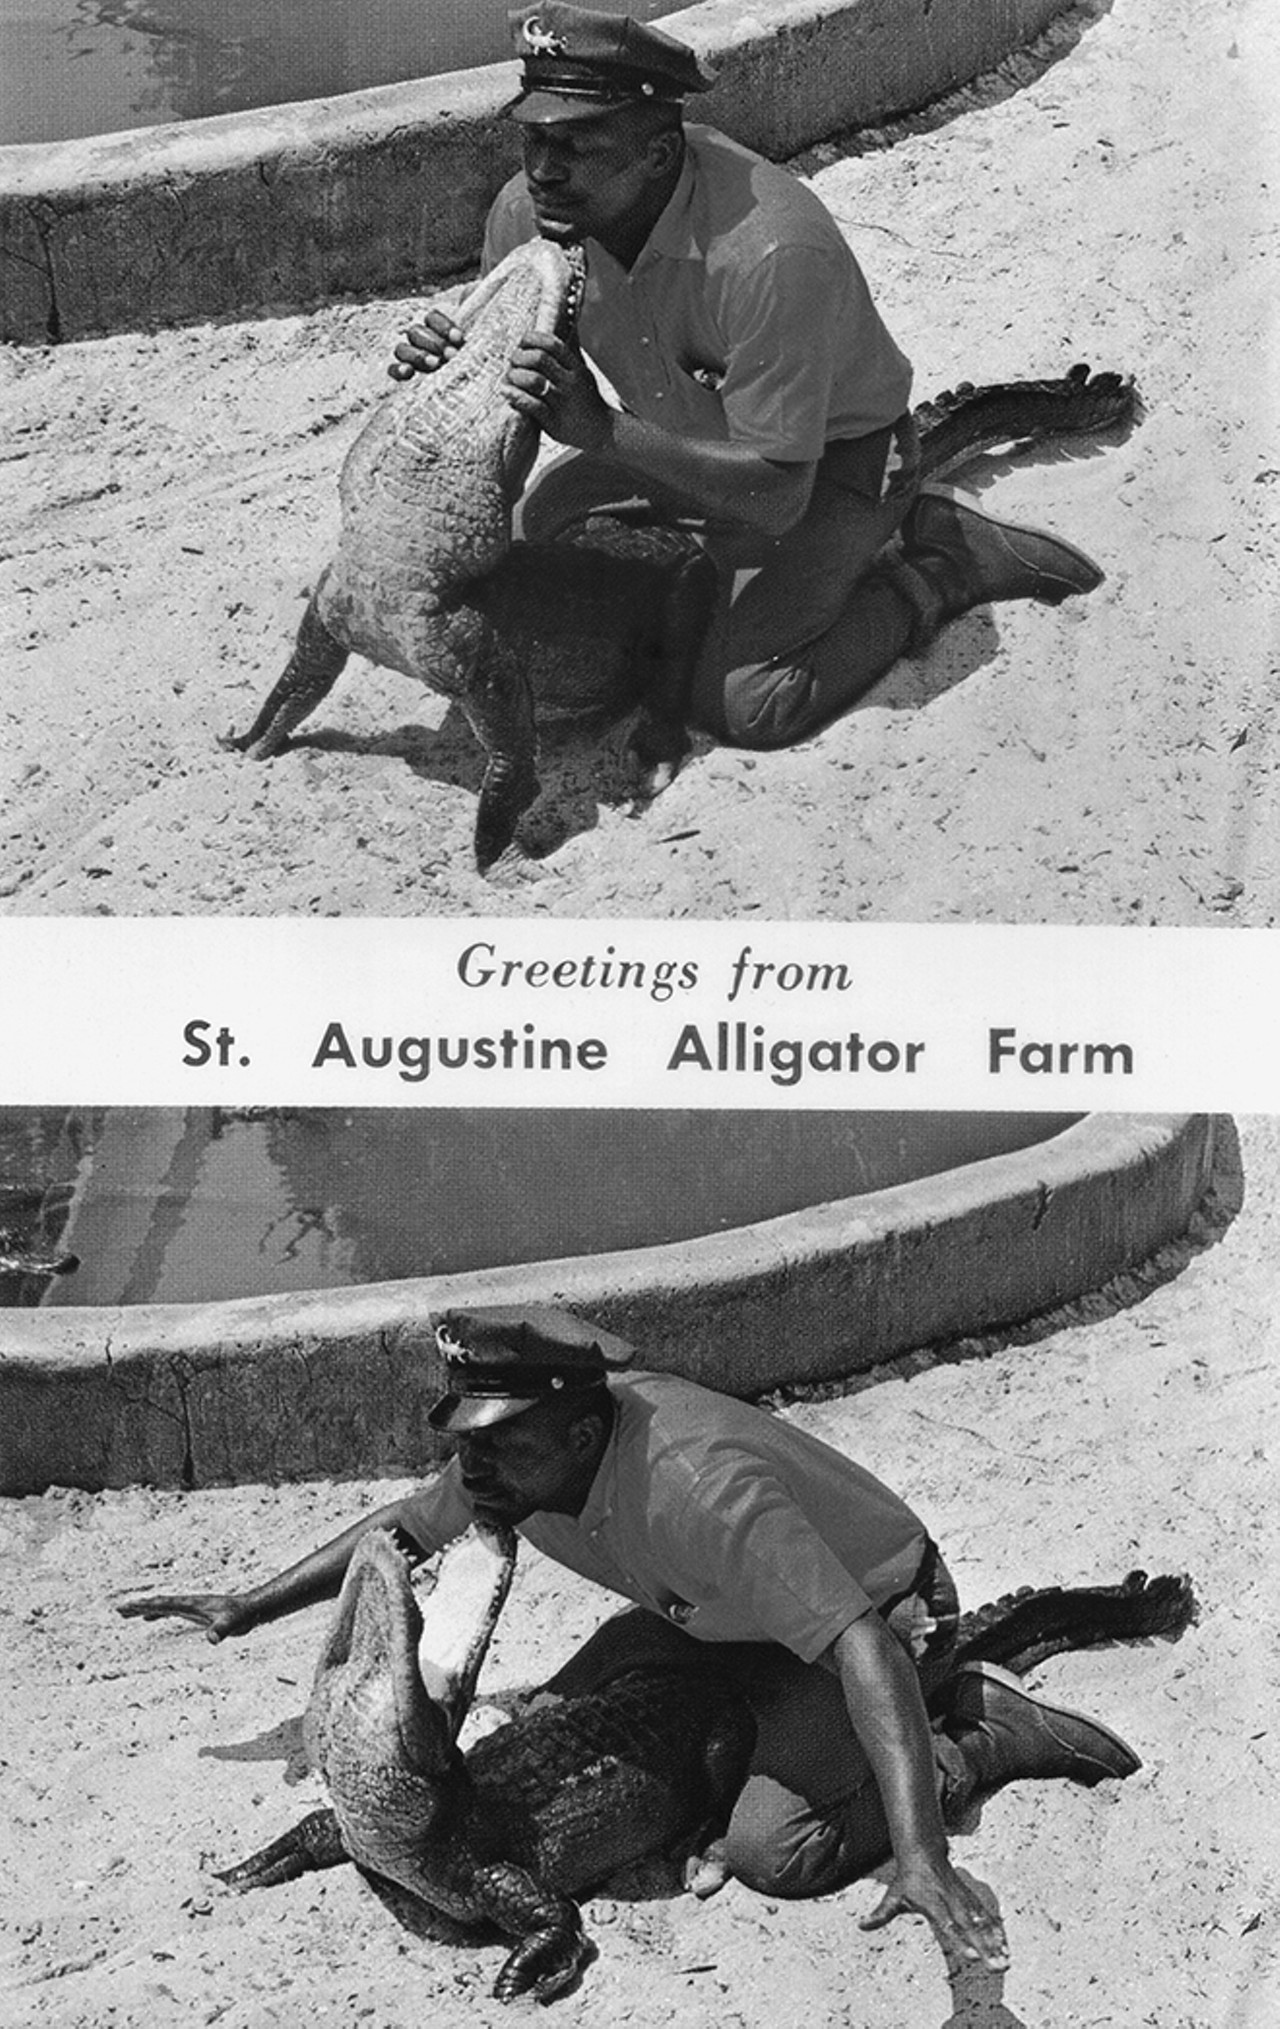 St. Augustine Alligator Farm alligator wrestler Christopher Lightburn was featured on a billboard just outside St. Augustine, welcoming tourists. He was also known as the &#147;Mayor of Lincolnville,&#148; for his community service in this historic neighborhood established by former slaves in 1866. By permission of Lu Vickers. Reprinted with permission of the University Press of Florida.